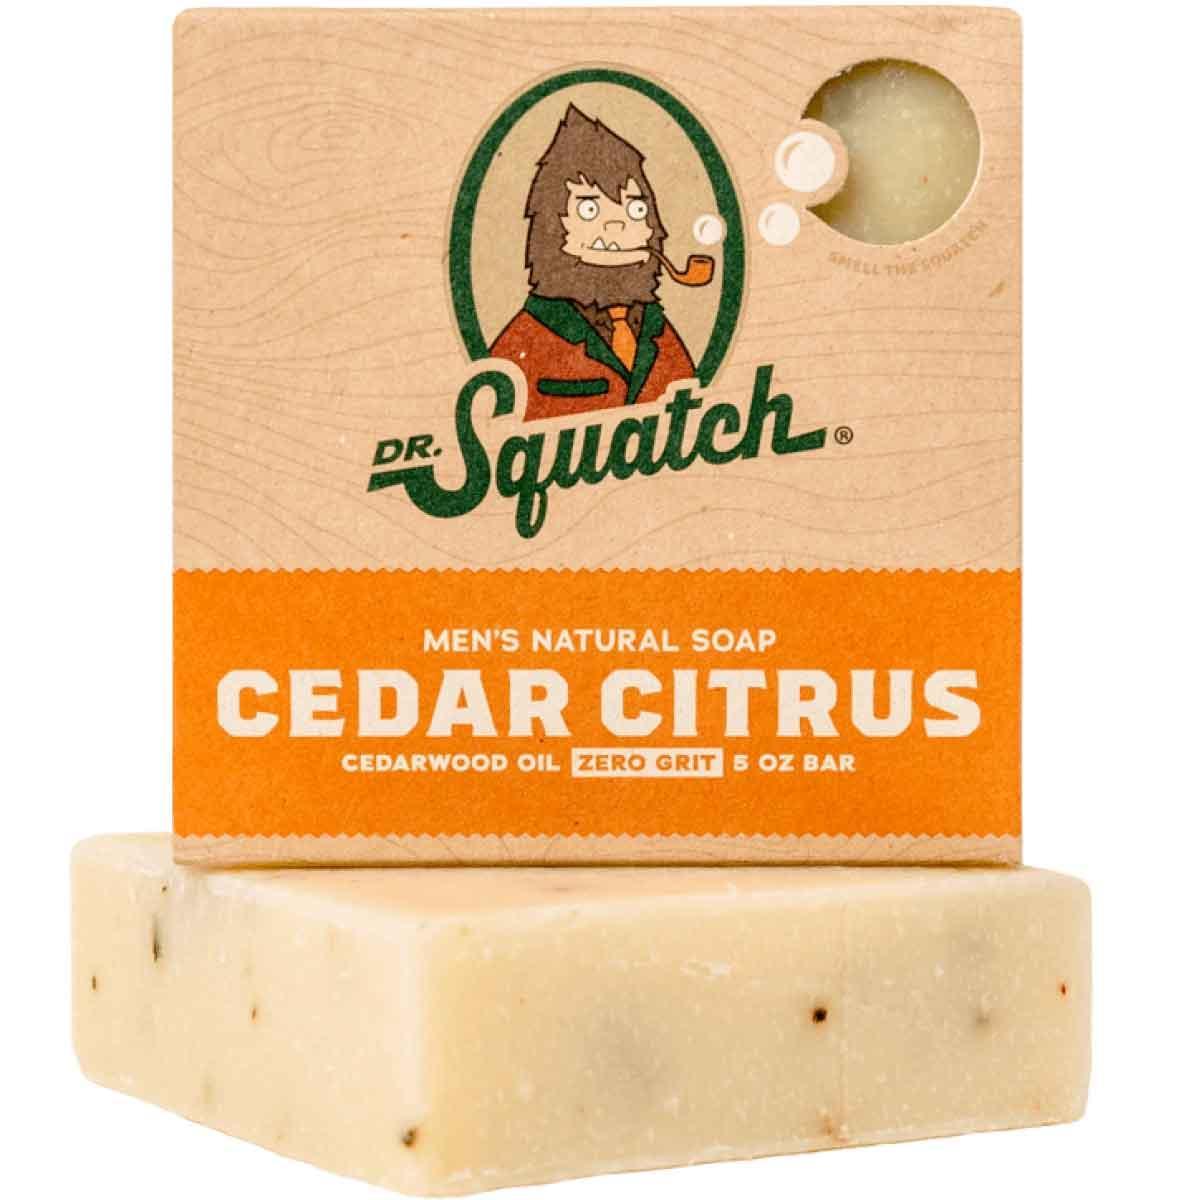 Dr Squatch Spidey Suds Review 